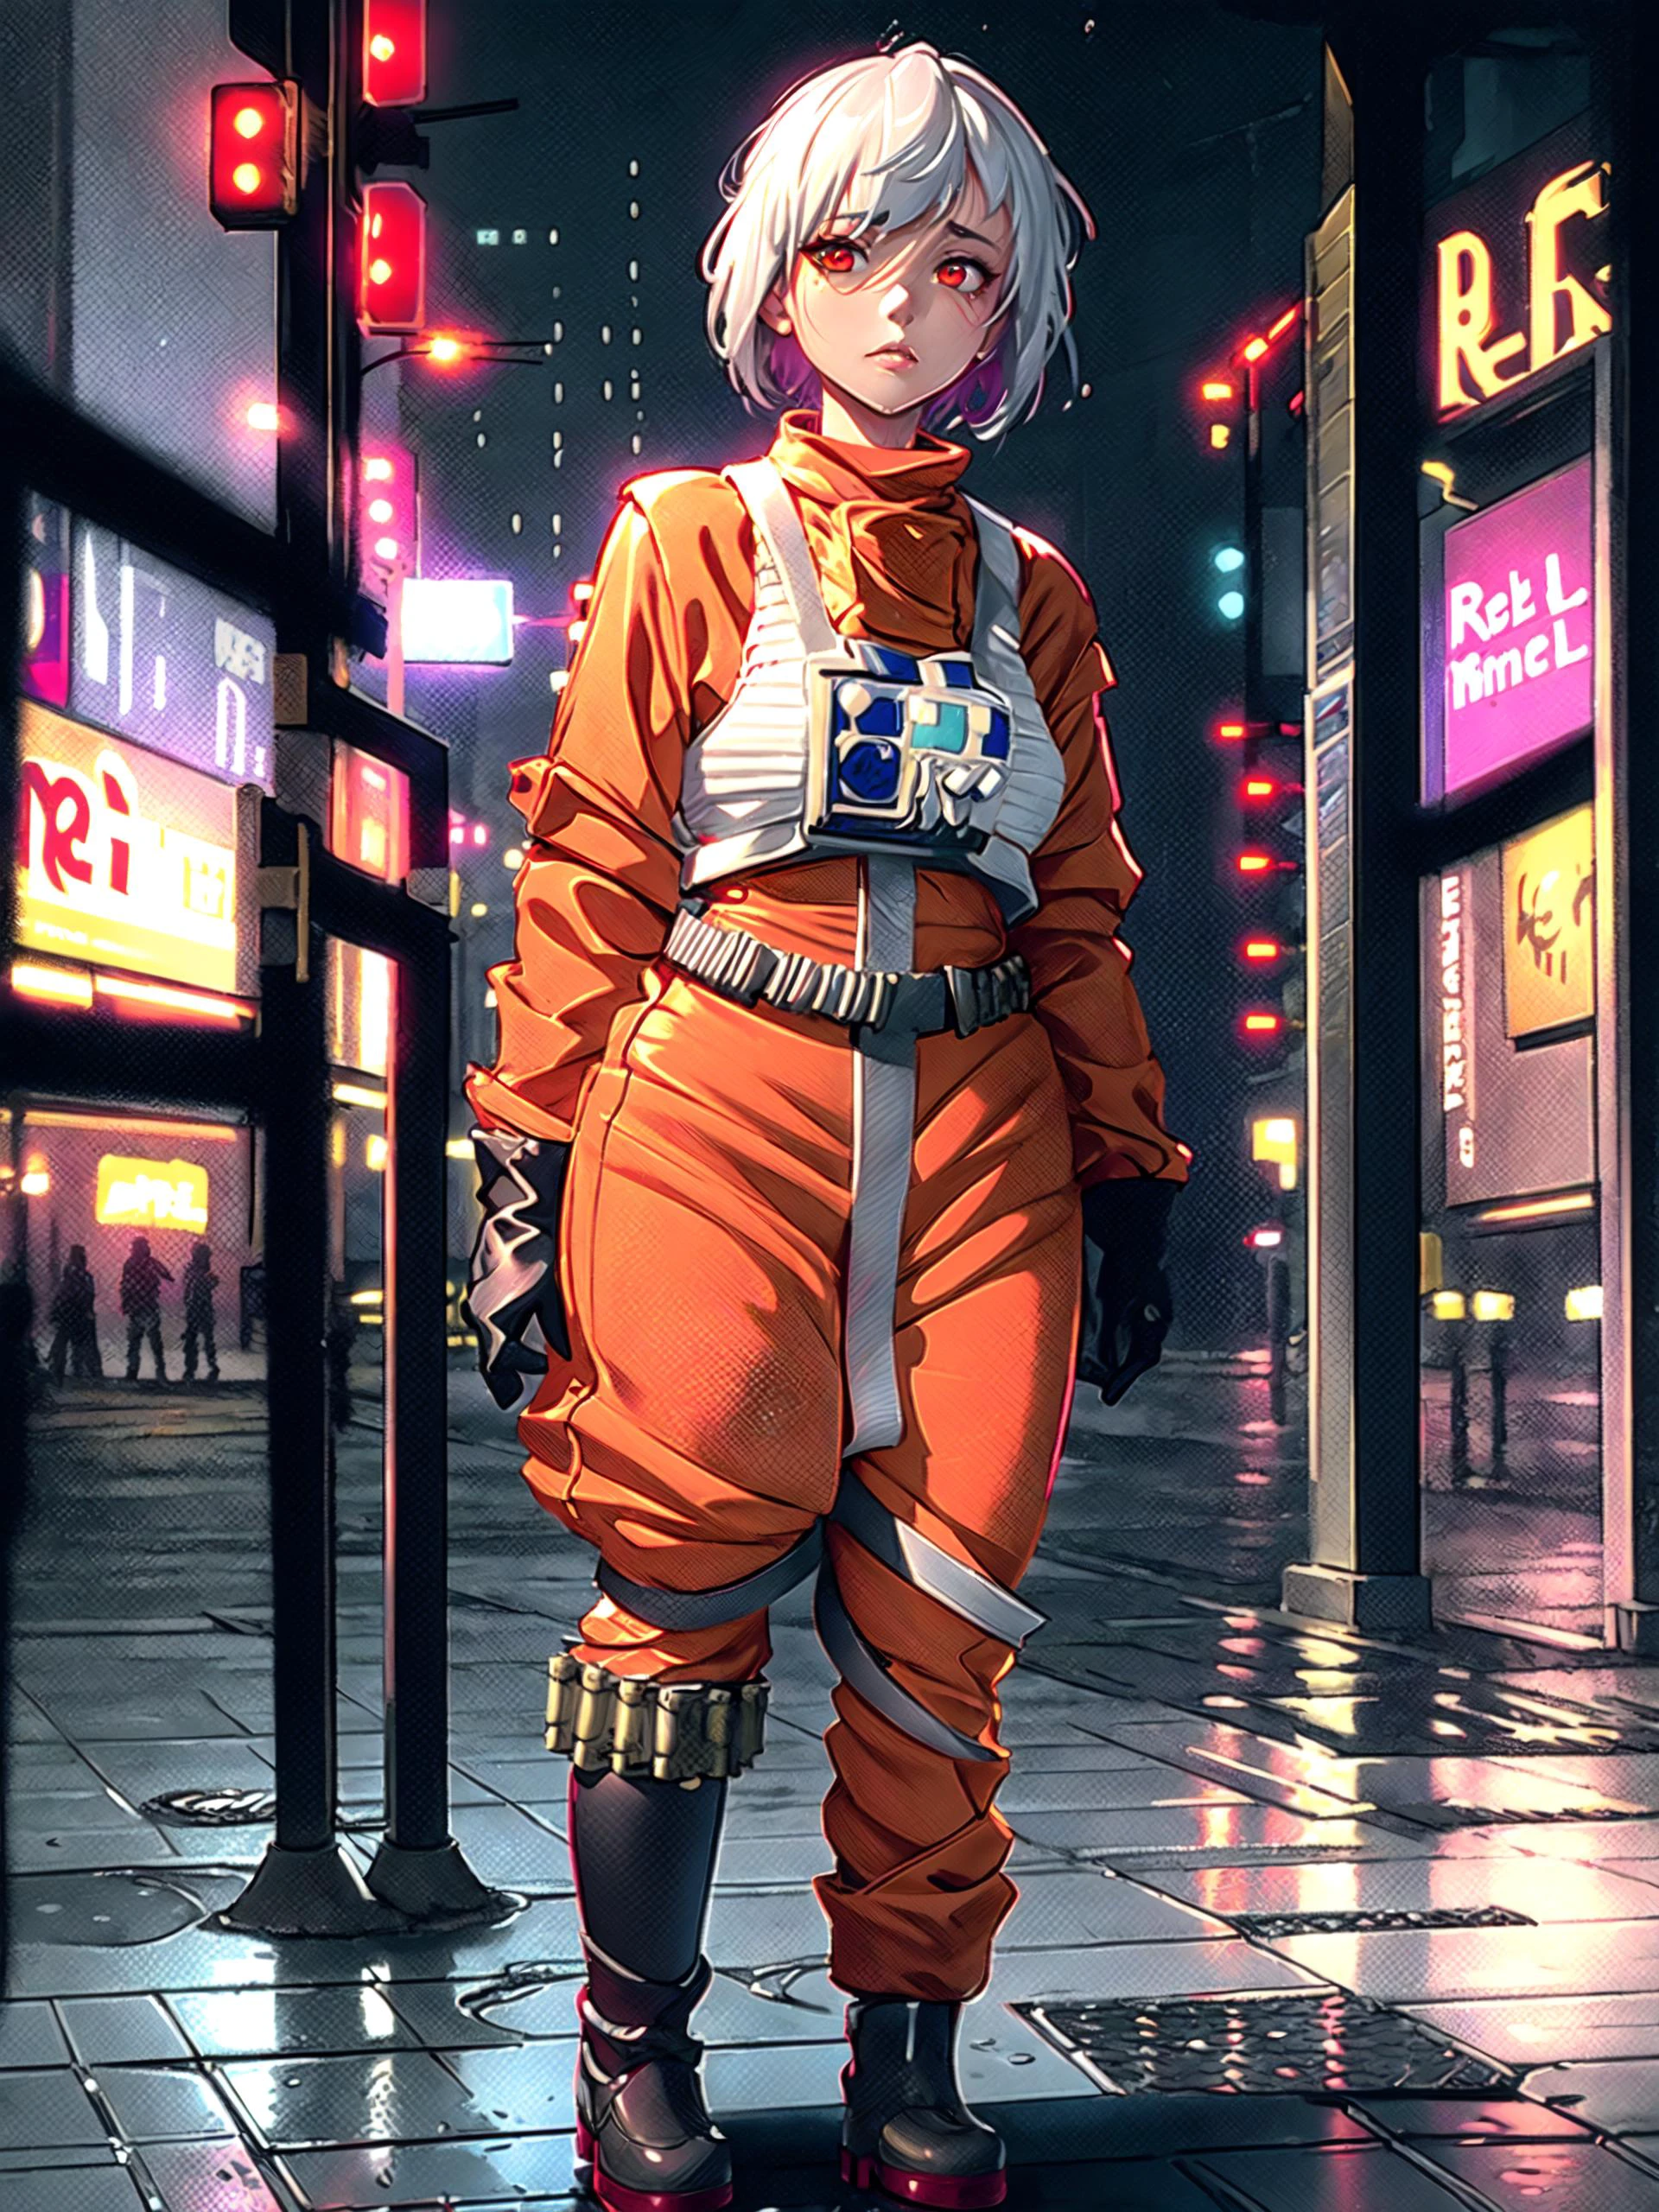 1girl in (rebel pilot suit:1.38), girl, white Hair, glowing red eyes, looking up at the sky, standing on the sidewalk in the rain, somber expression, dramatic pose, wet, ground wet, colorful lights, sidewalk, city night lights, heavy rain, expressionless